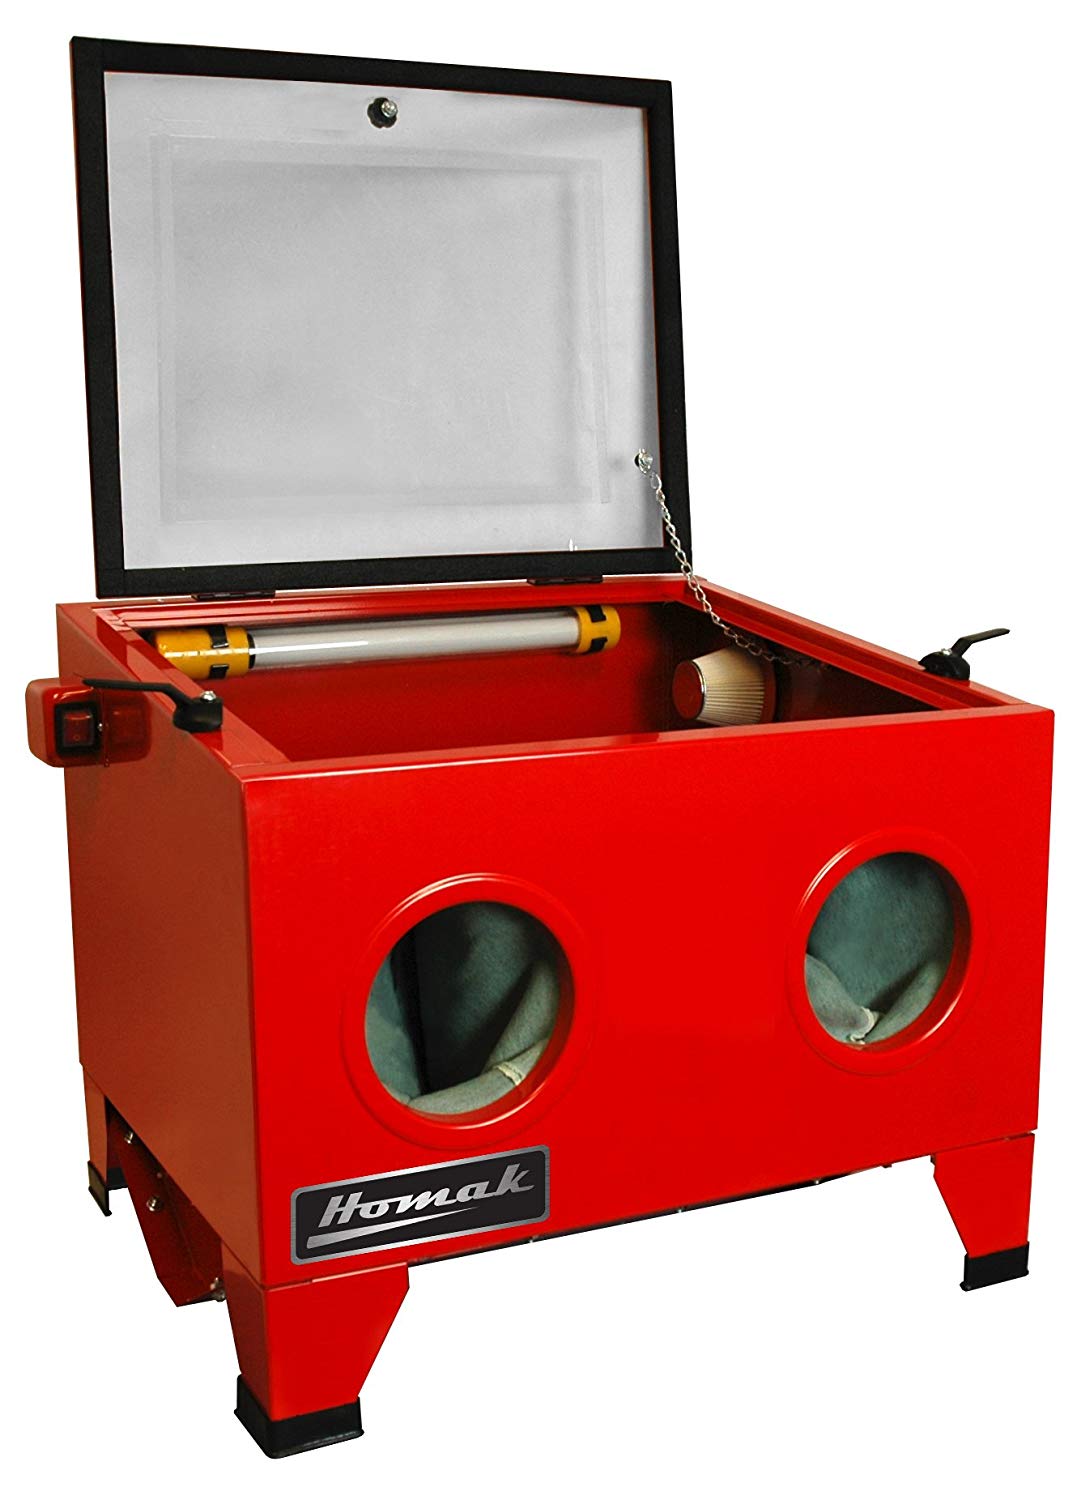 Homak 23-Inch Table Top Abrasive Blast Cabinet. Red. RD00920250 - MPR Tools & Equipment